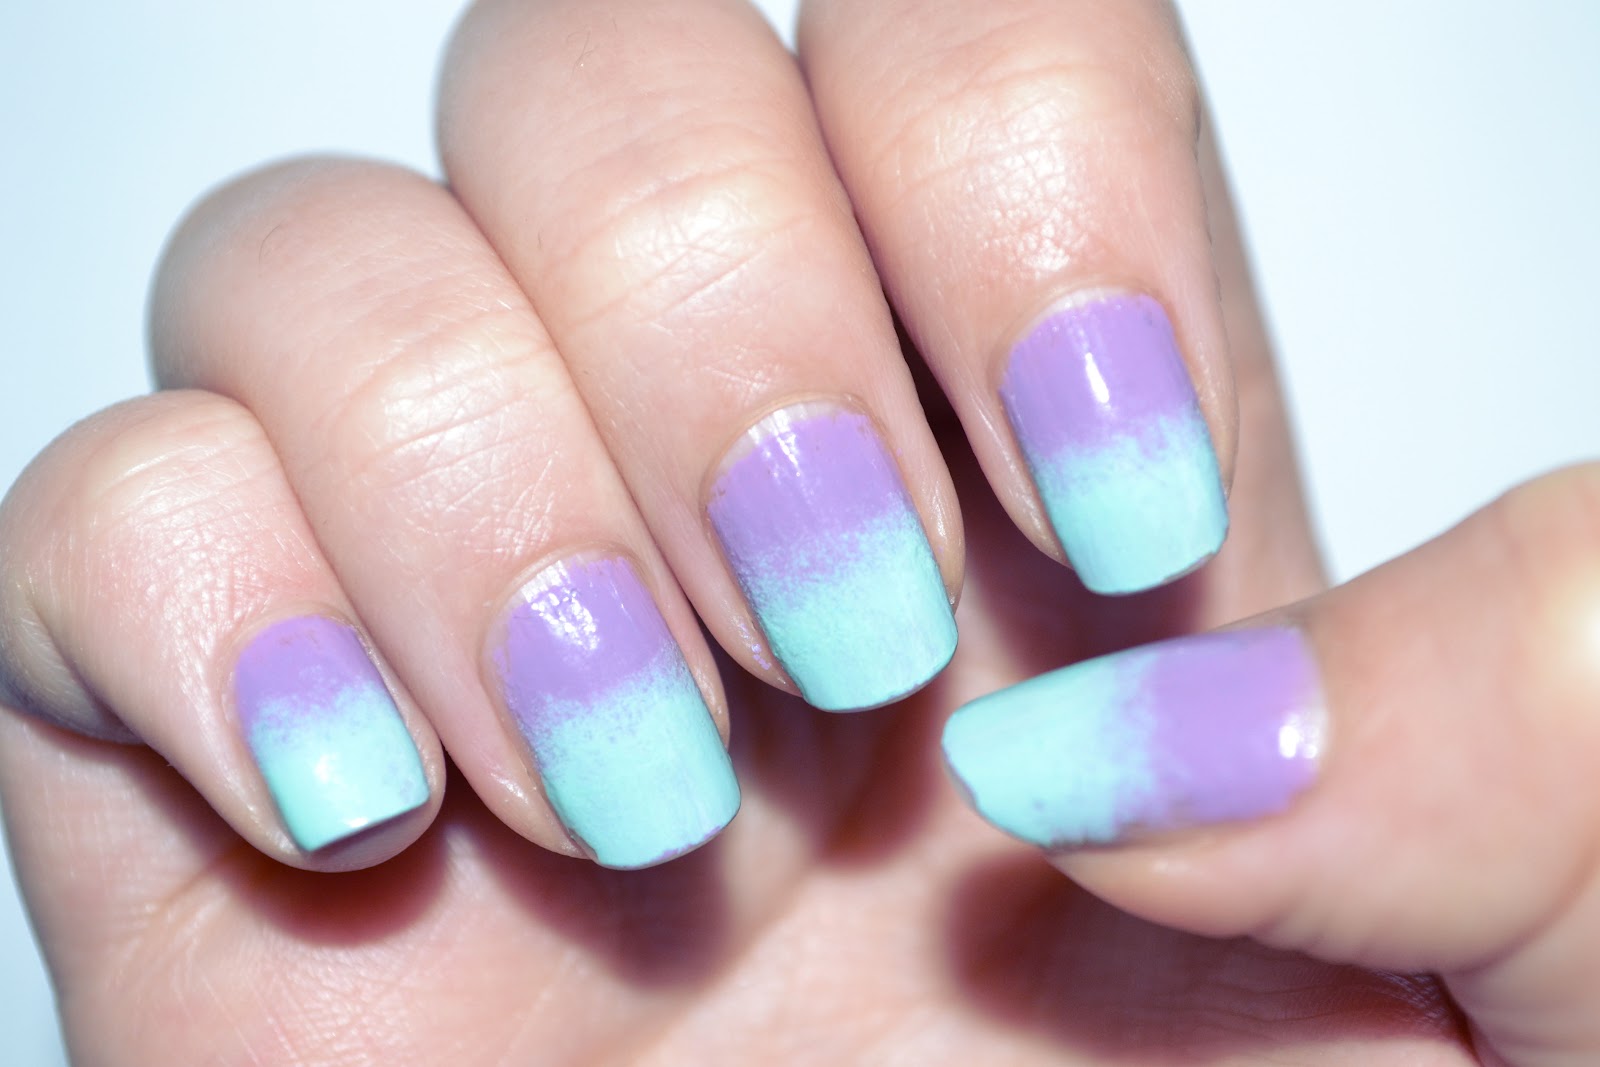 Easy and Fun Nail Art Designs to Try at Home - wide 1